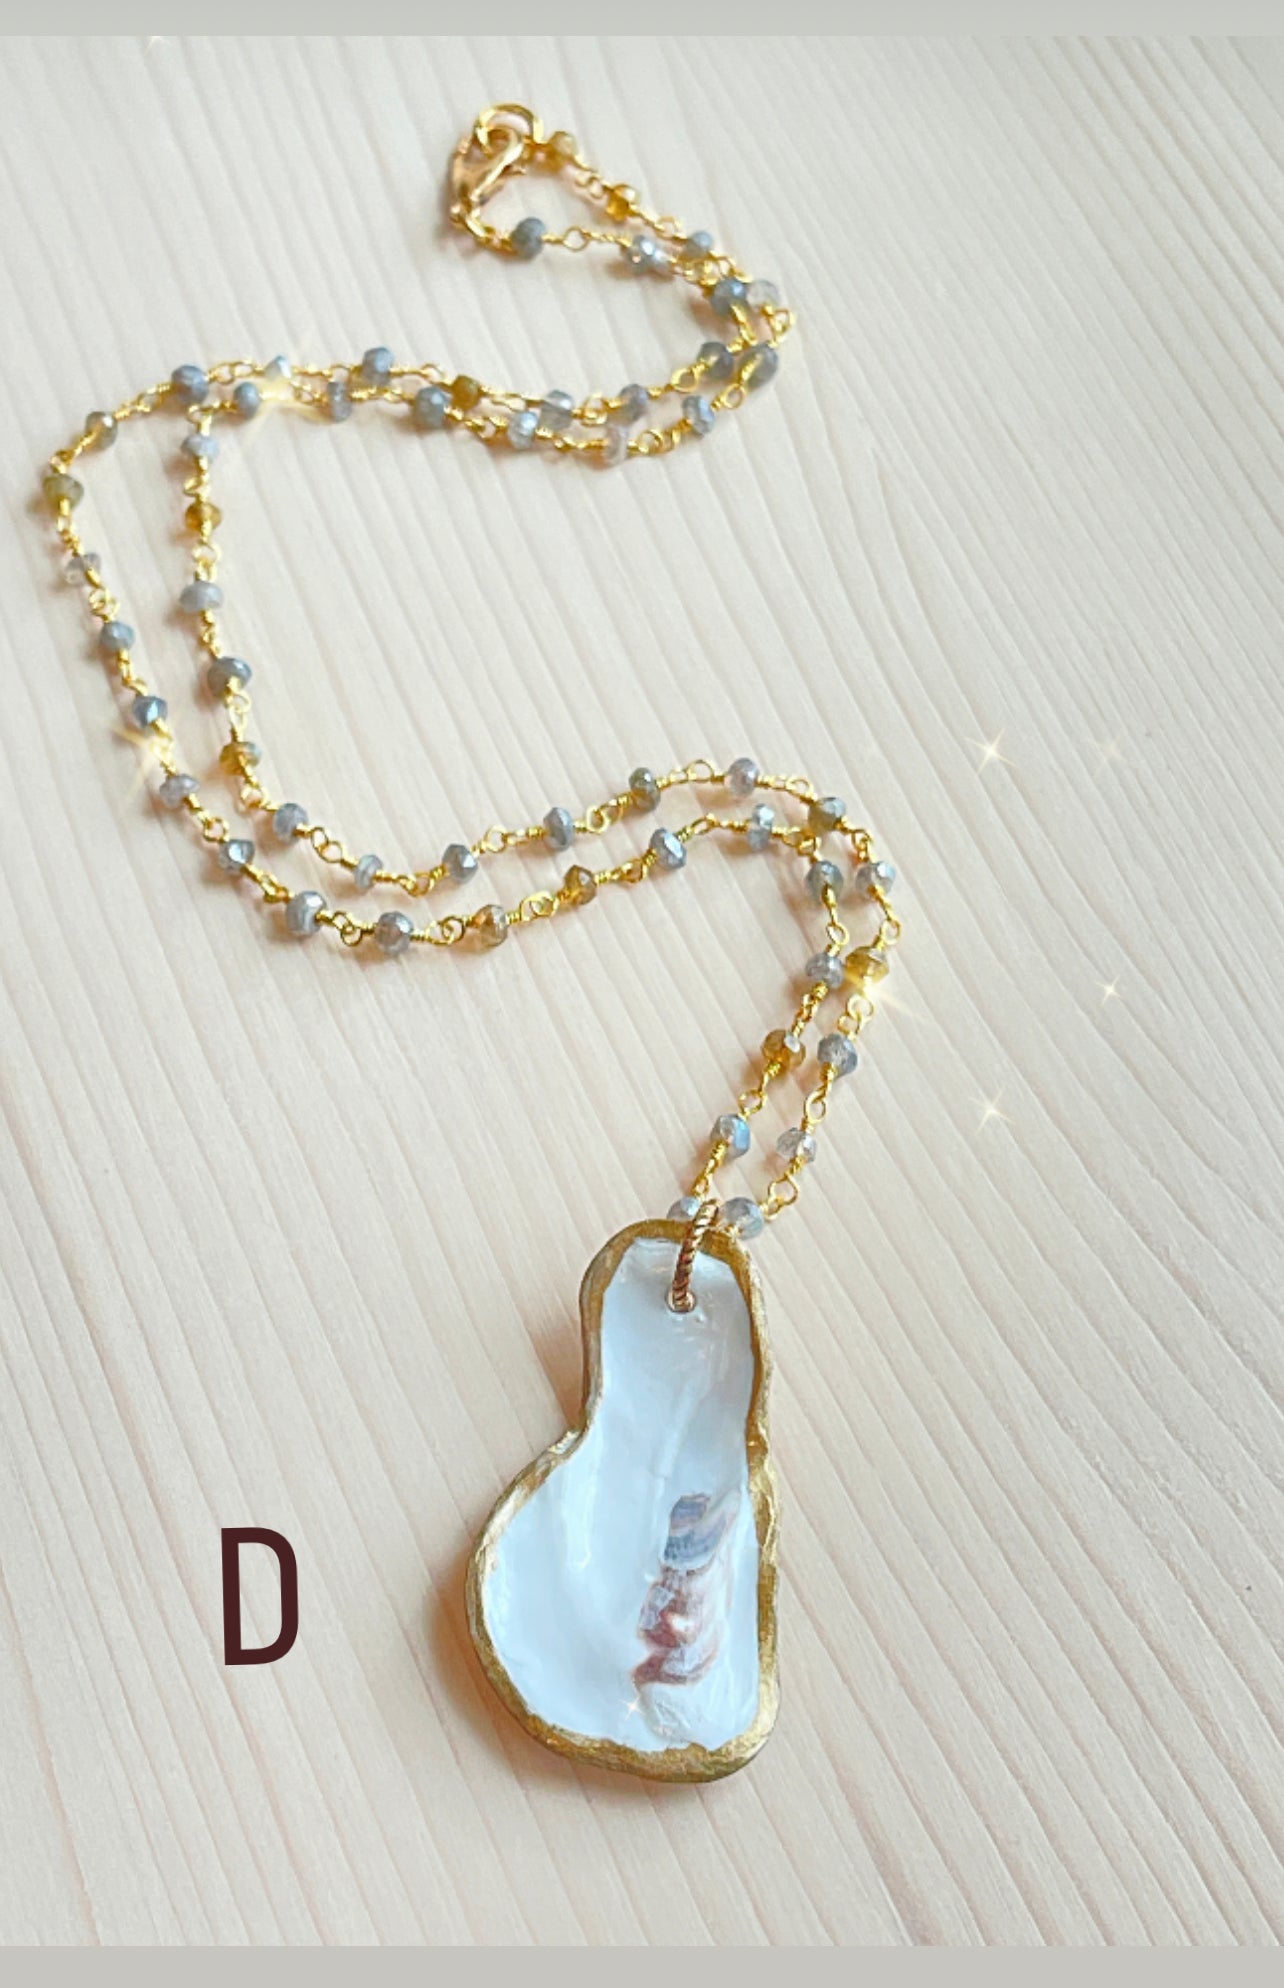 D.  Oyster shell with mystic labradorite and amber gemstone beaded chain.